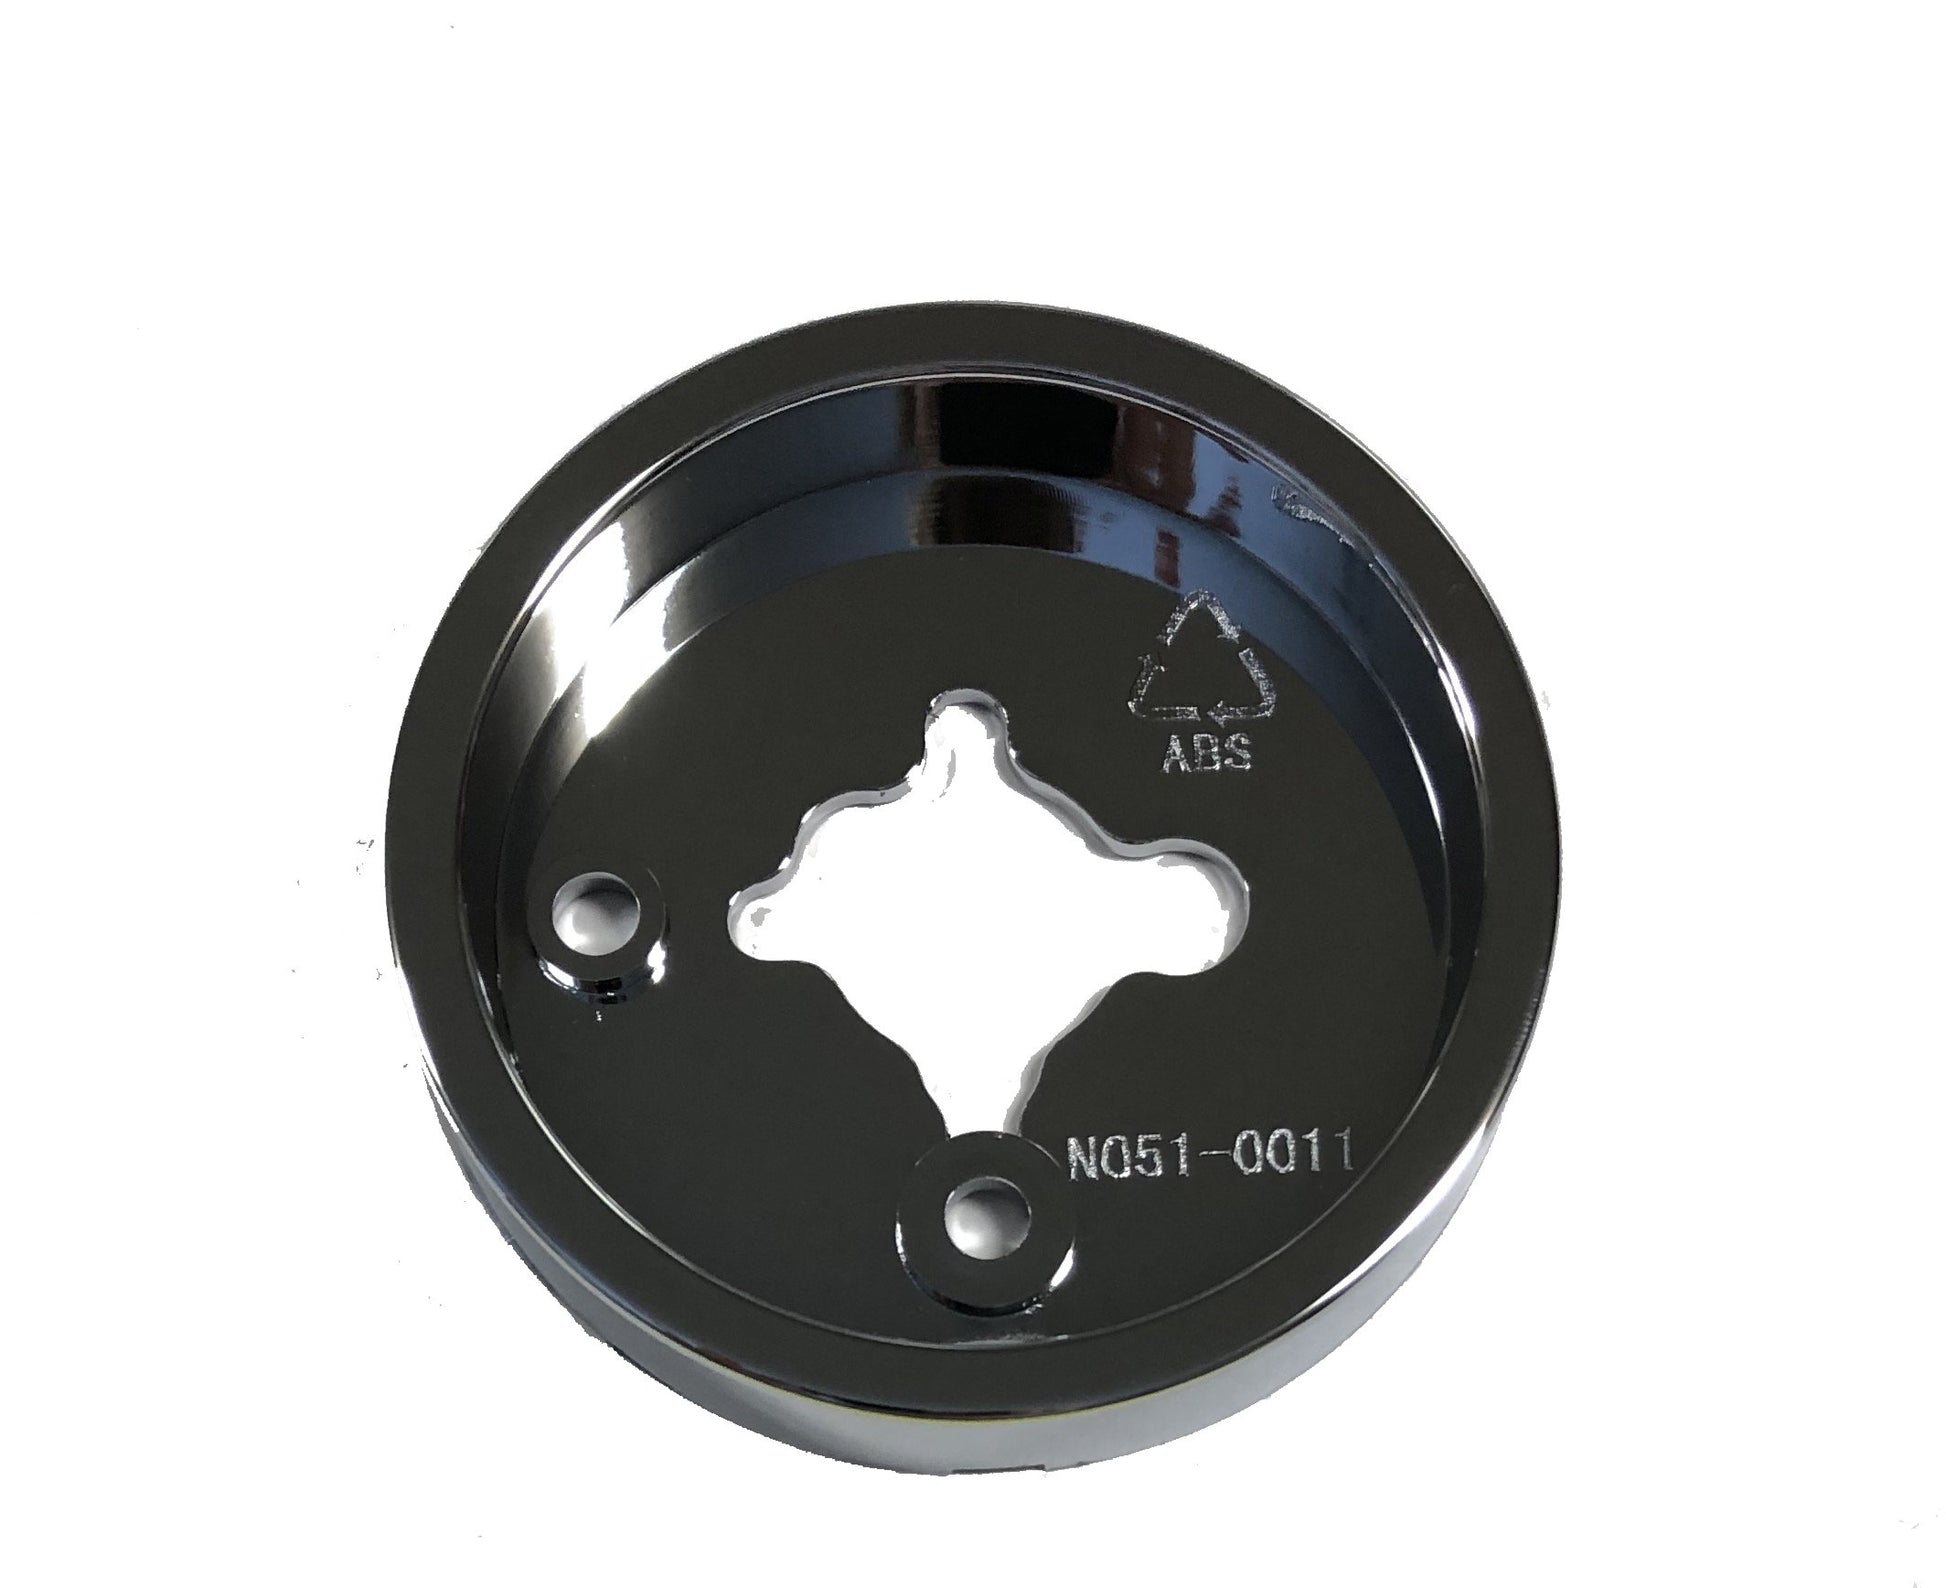 Napoleon N051001 Control Knob Bezel. Give your barbecue a little TLC this spring before your next cookout, and replace those old and cracked knob bezels. Available to order with Barbecues Galore: Burlington, Oakville, Etobicoke & Calgary.